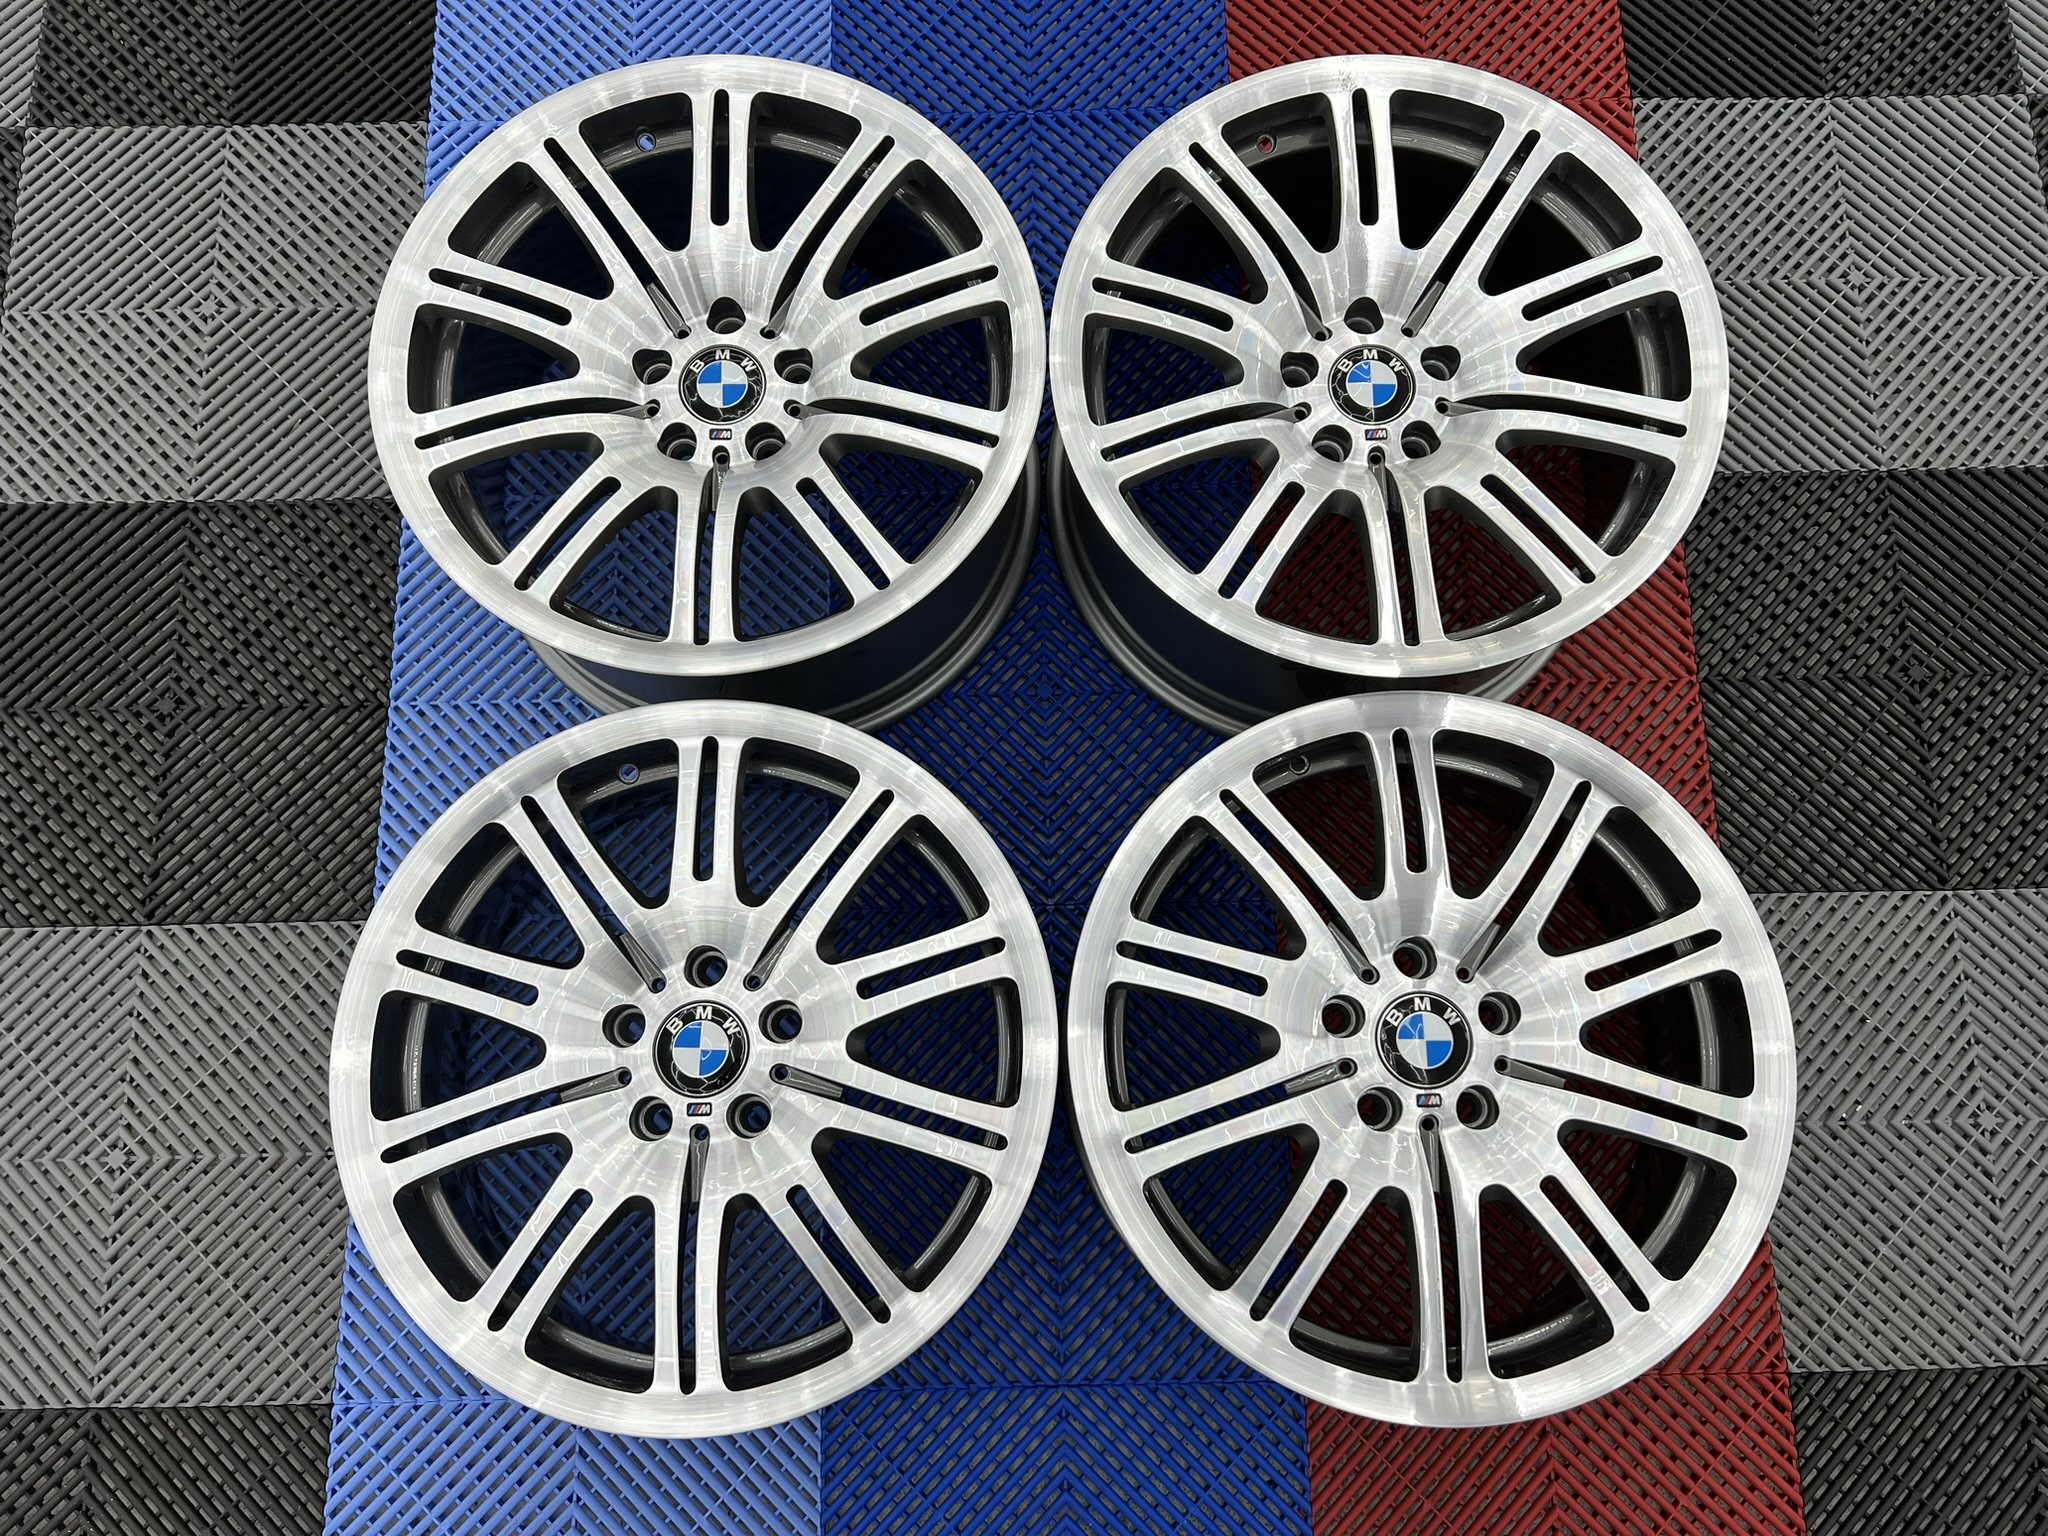 USED 19" GENUINE BMW STYLE 67M E46 M3 POLISHED ALLOY WHEELS,WIDE REAR,FULLY REFURBED